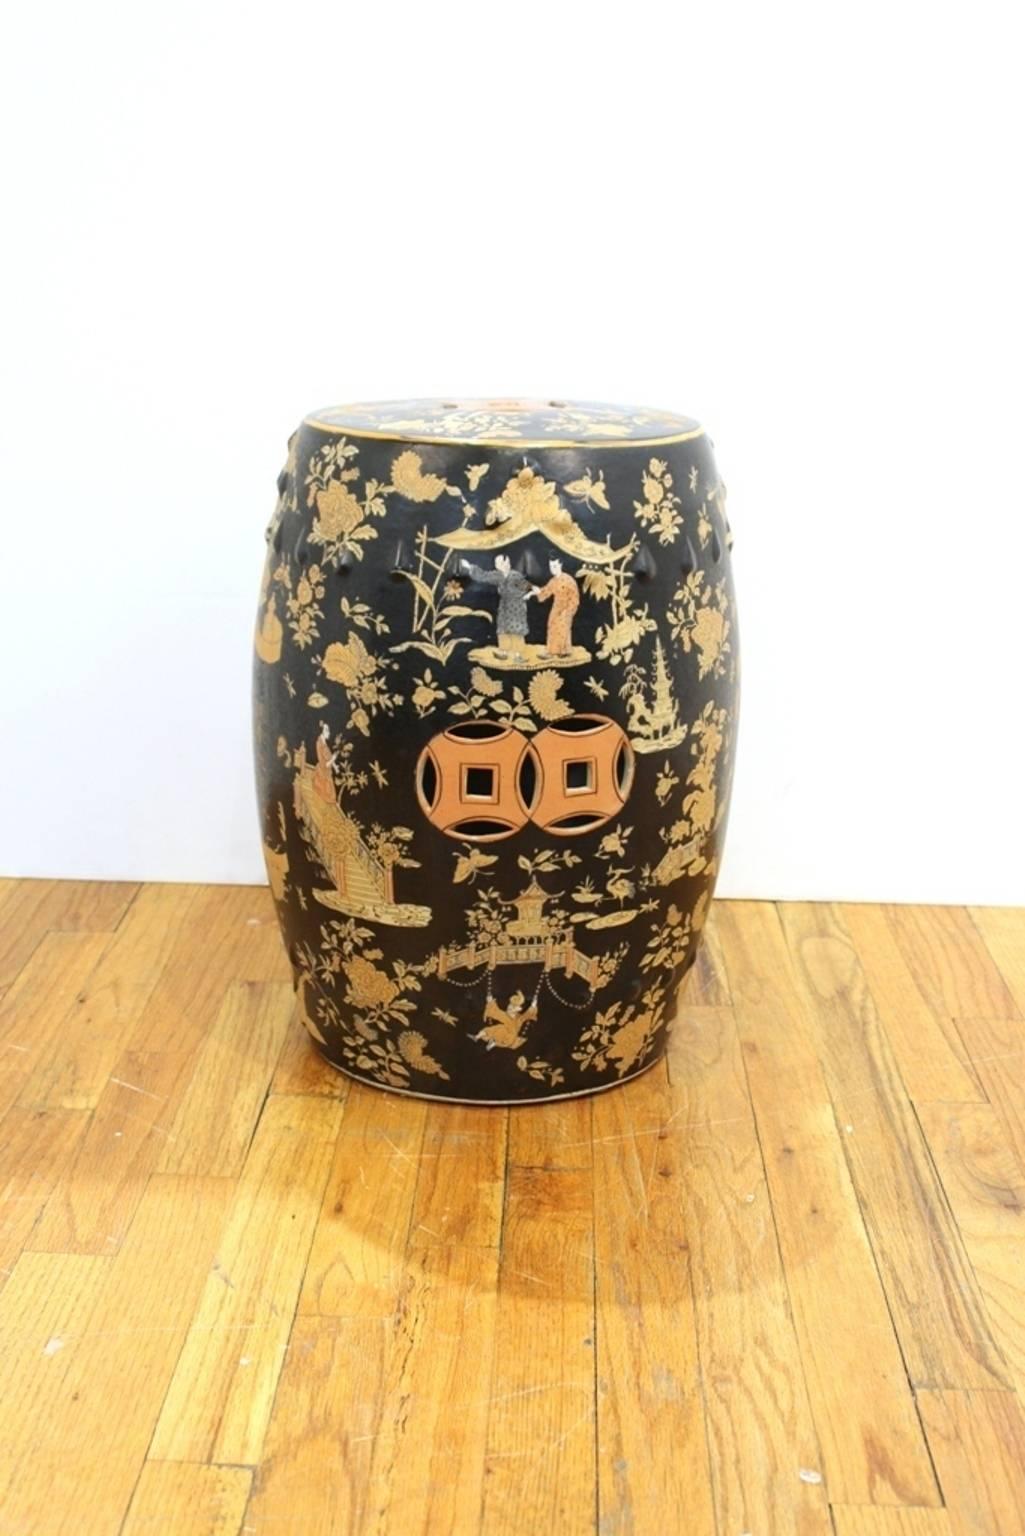 A chinoiserie garden stool in black lacquer with landscapes, medallions and Chinese characters in shades of rust and cream. In good condition with age appropriate wear. 110765.